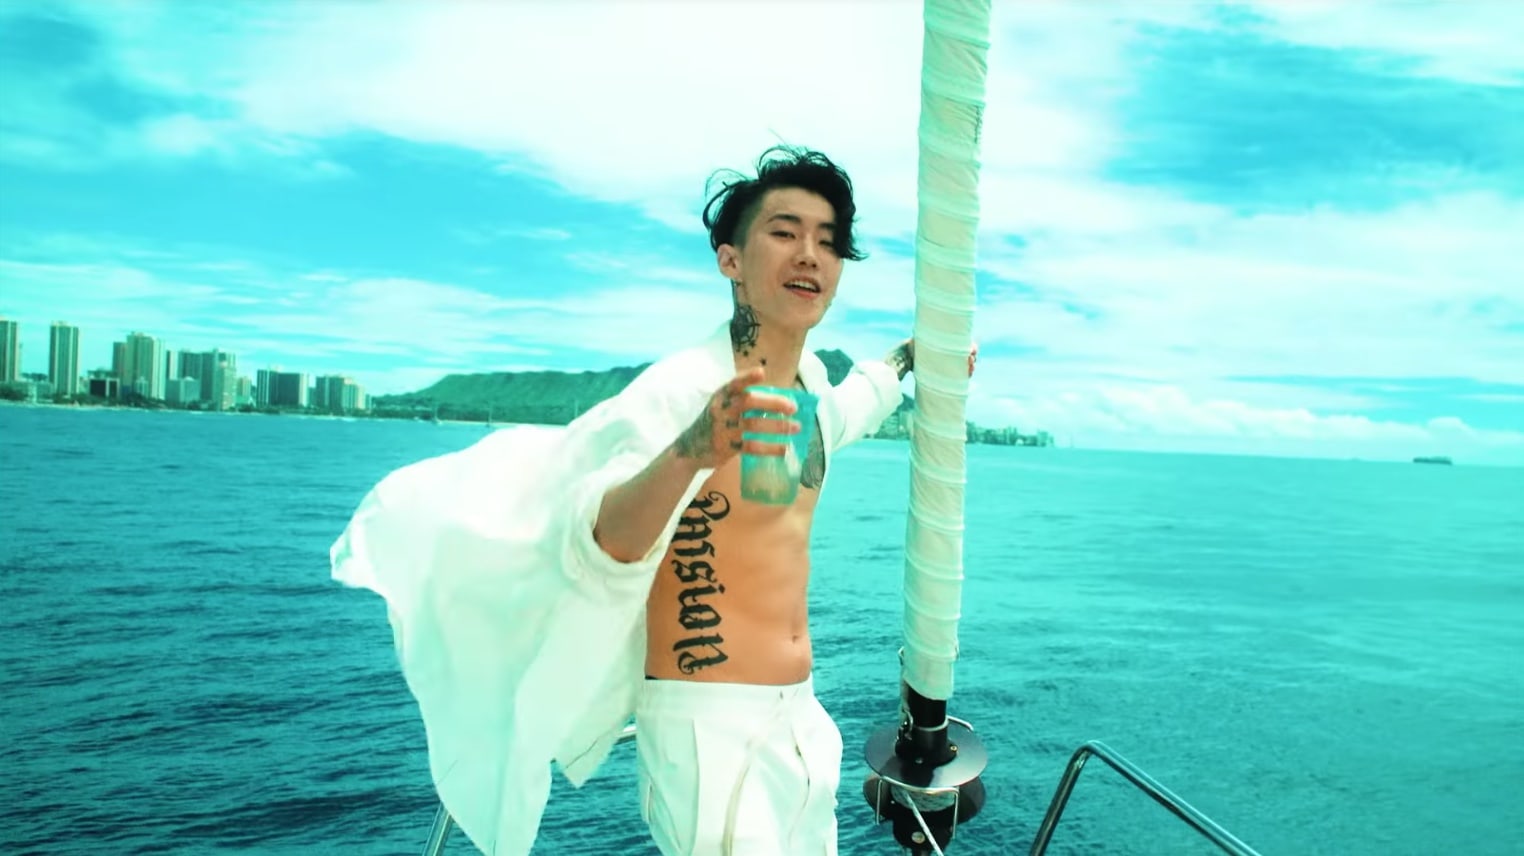 Jay Park's Blue Hair in "Yacht" Music Video - wide 6